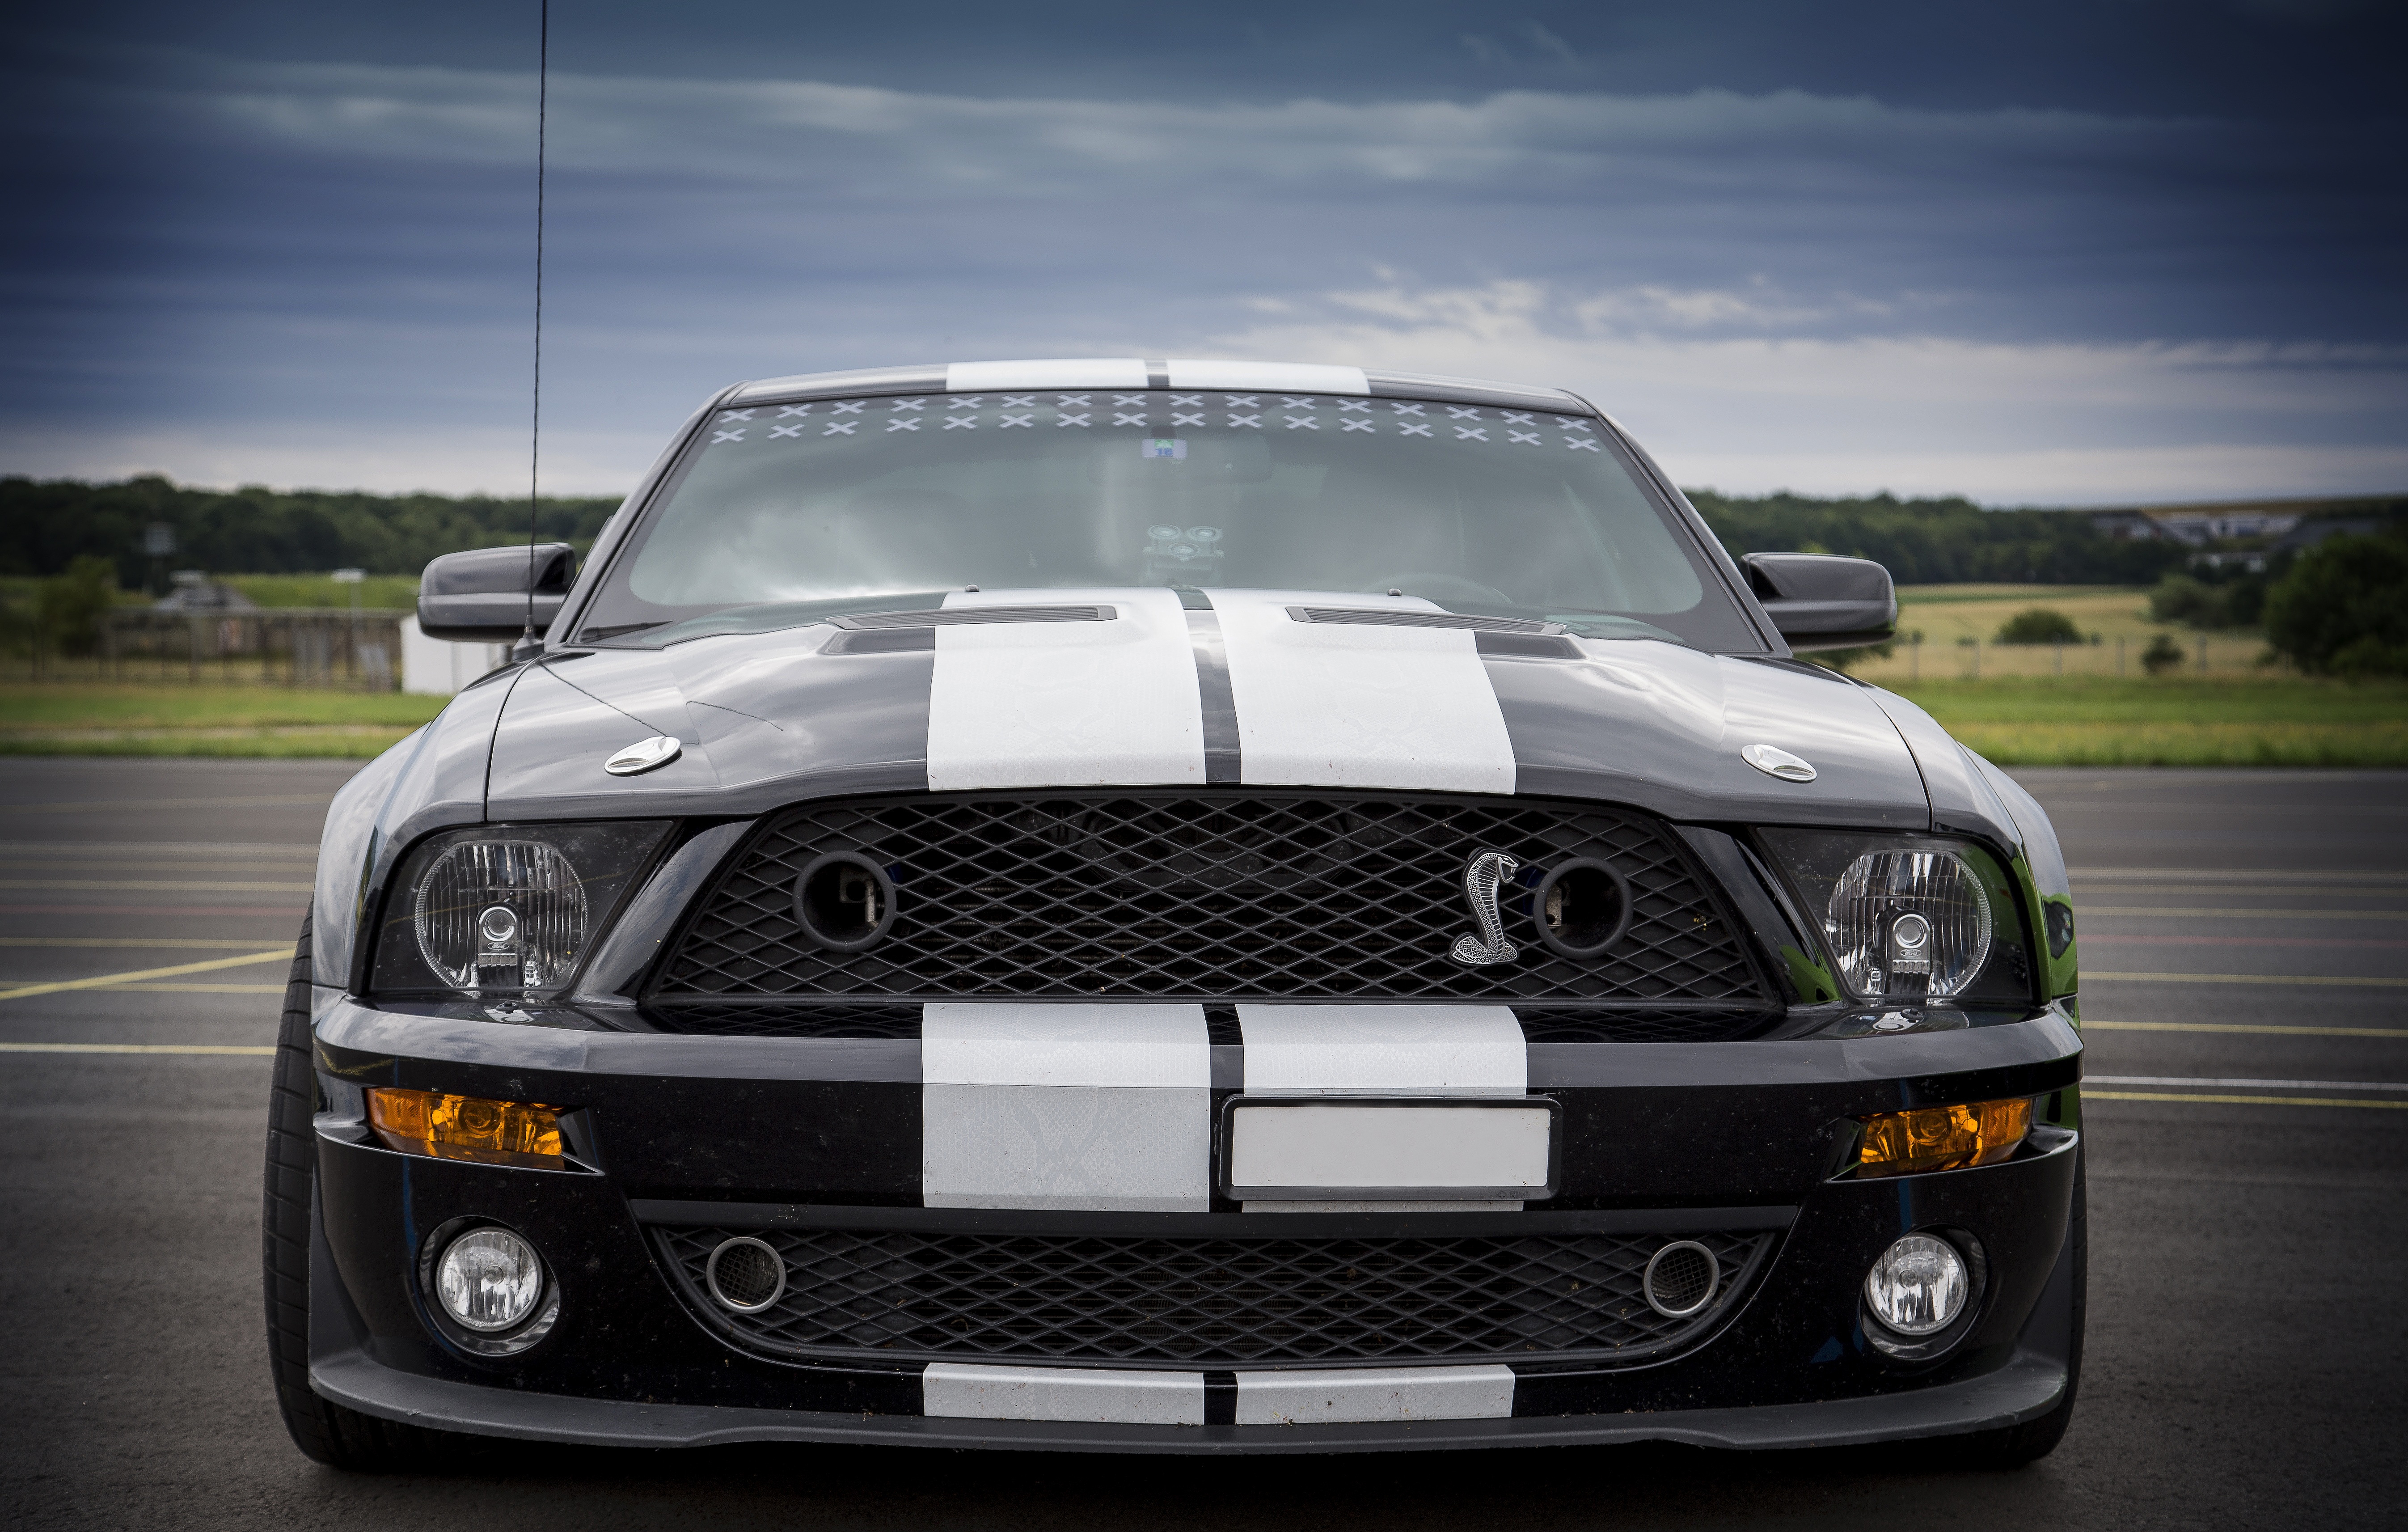 shelby, ford mustang, front view, car, sports, cars QHD